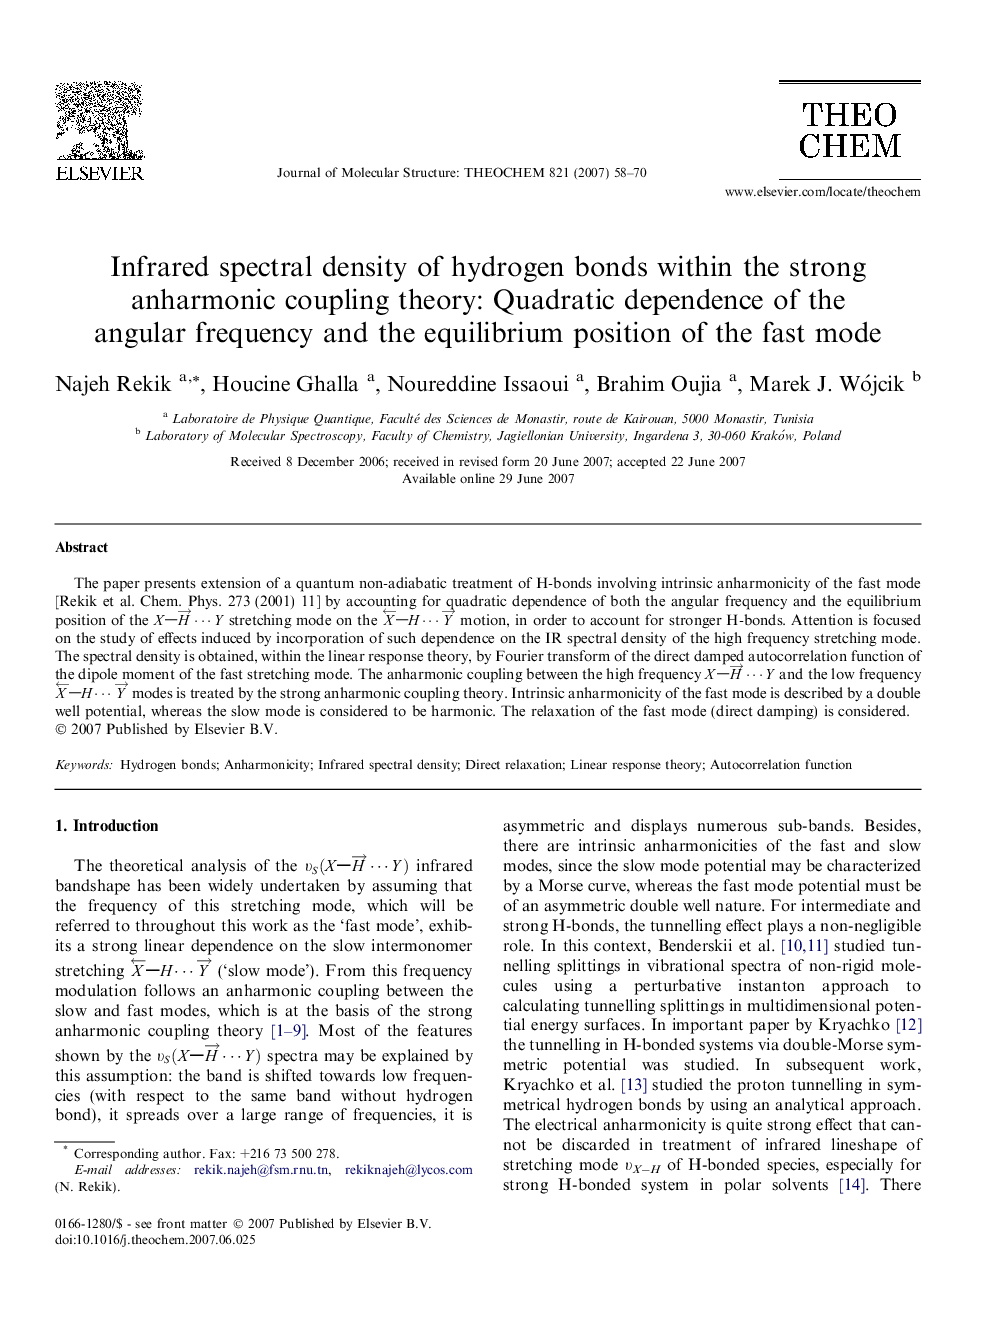 Infrared spectral density of hydrogen bonds within the strong anharmonic coupling theory: Quadratic dependence of the angular frequency and the equilibrium position of the fast mode